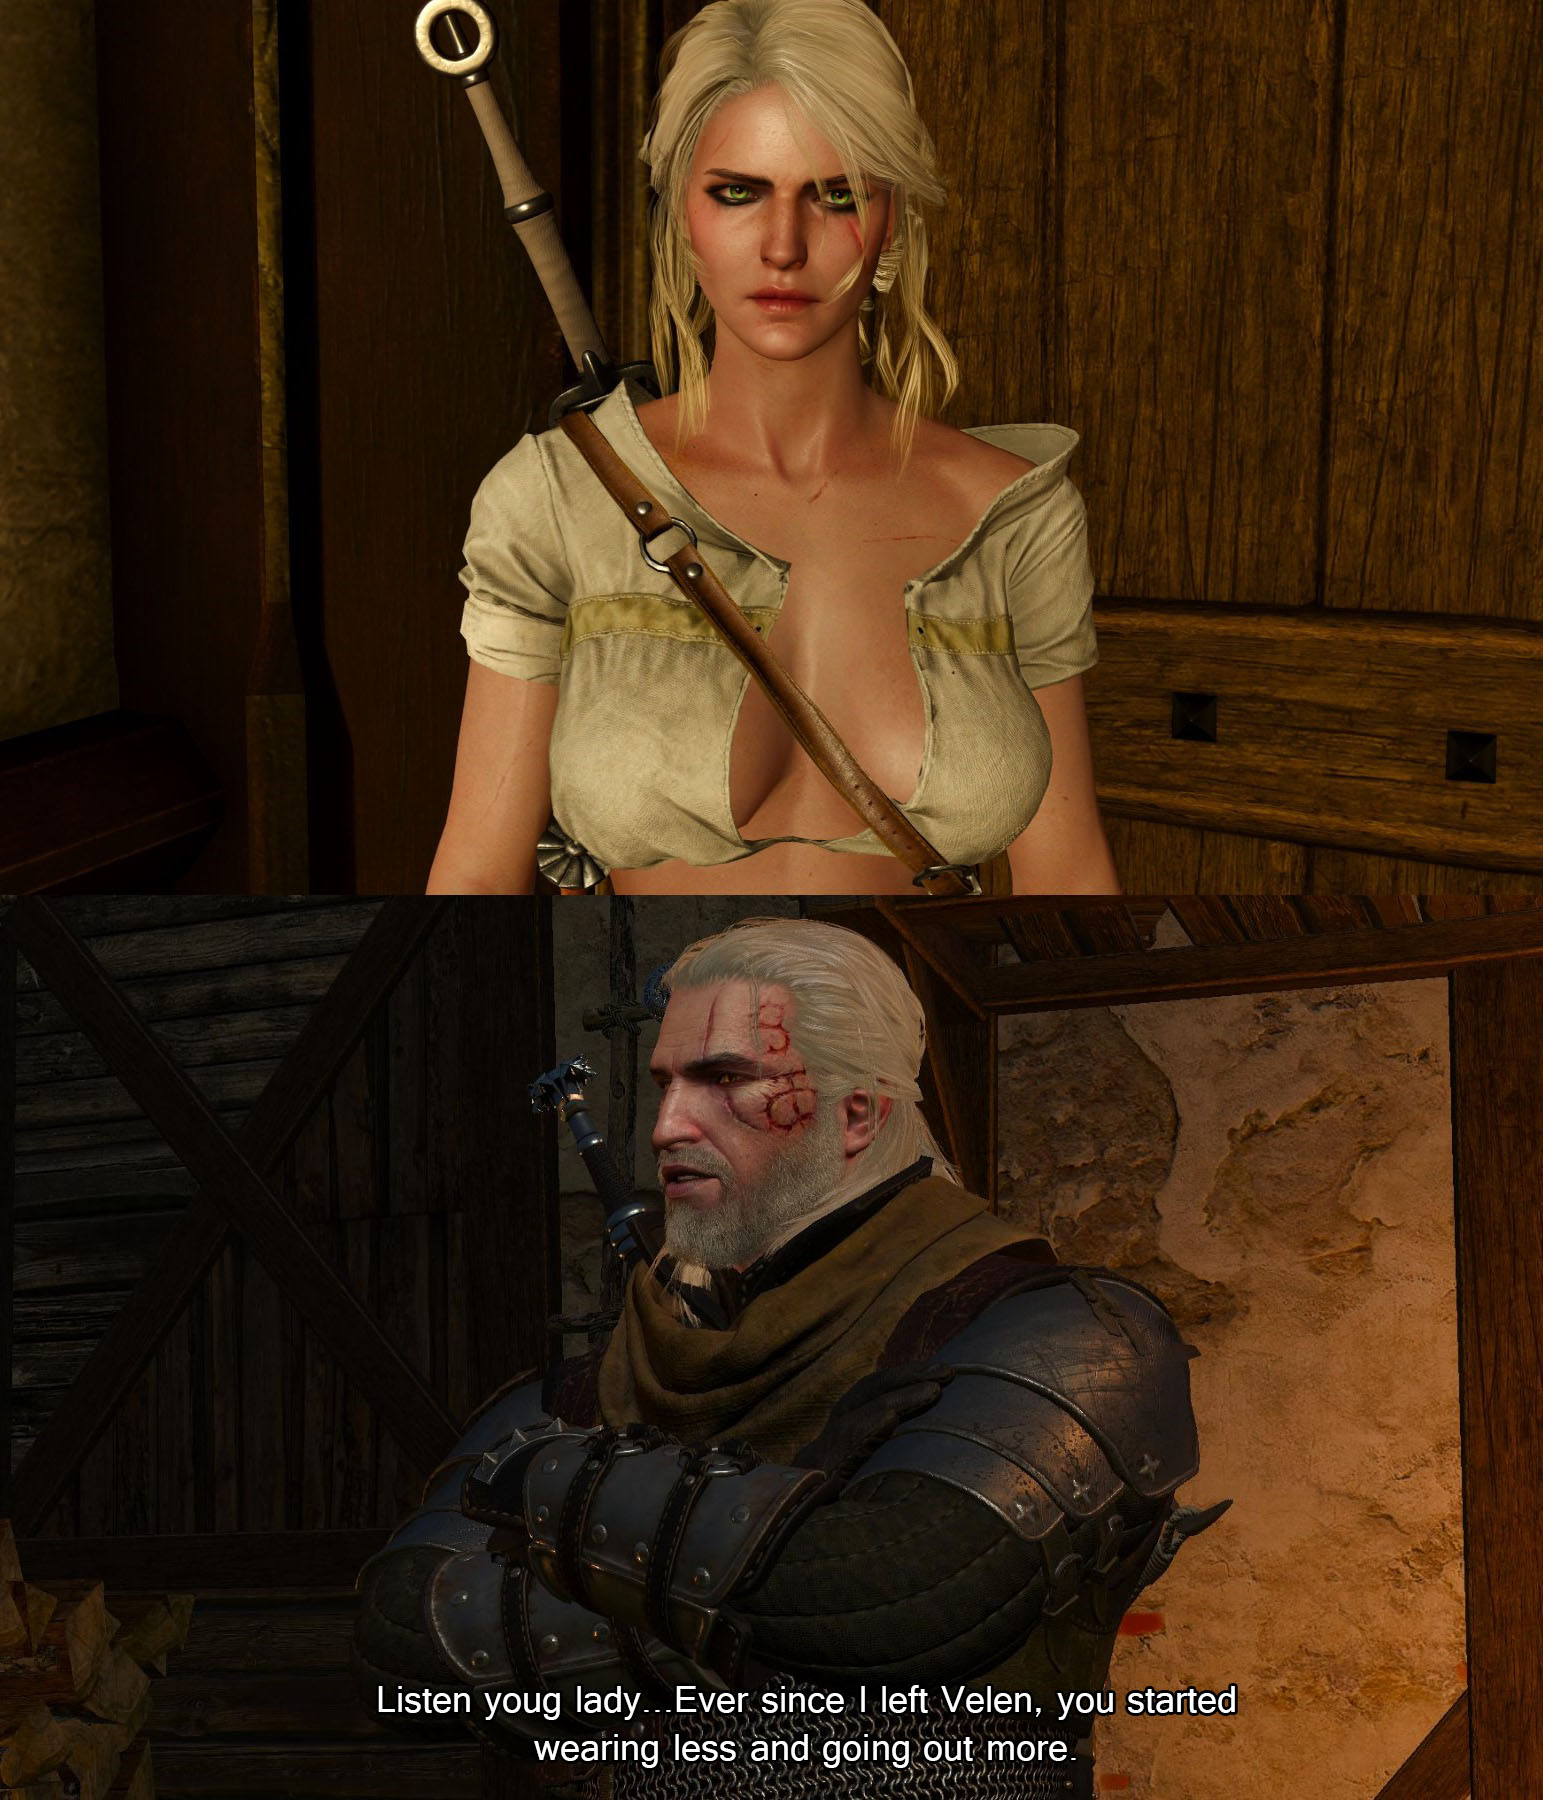 witcher breast expansion - Listen youg lady...Ever since I left Velen, you started wearing less and going out more.